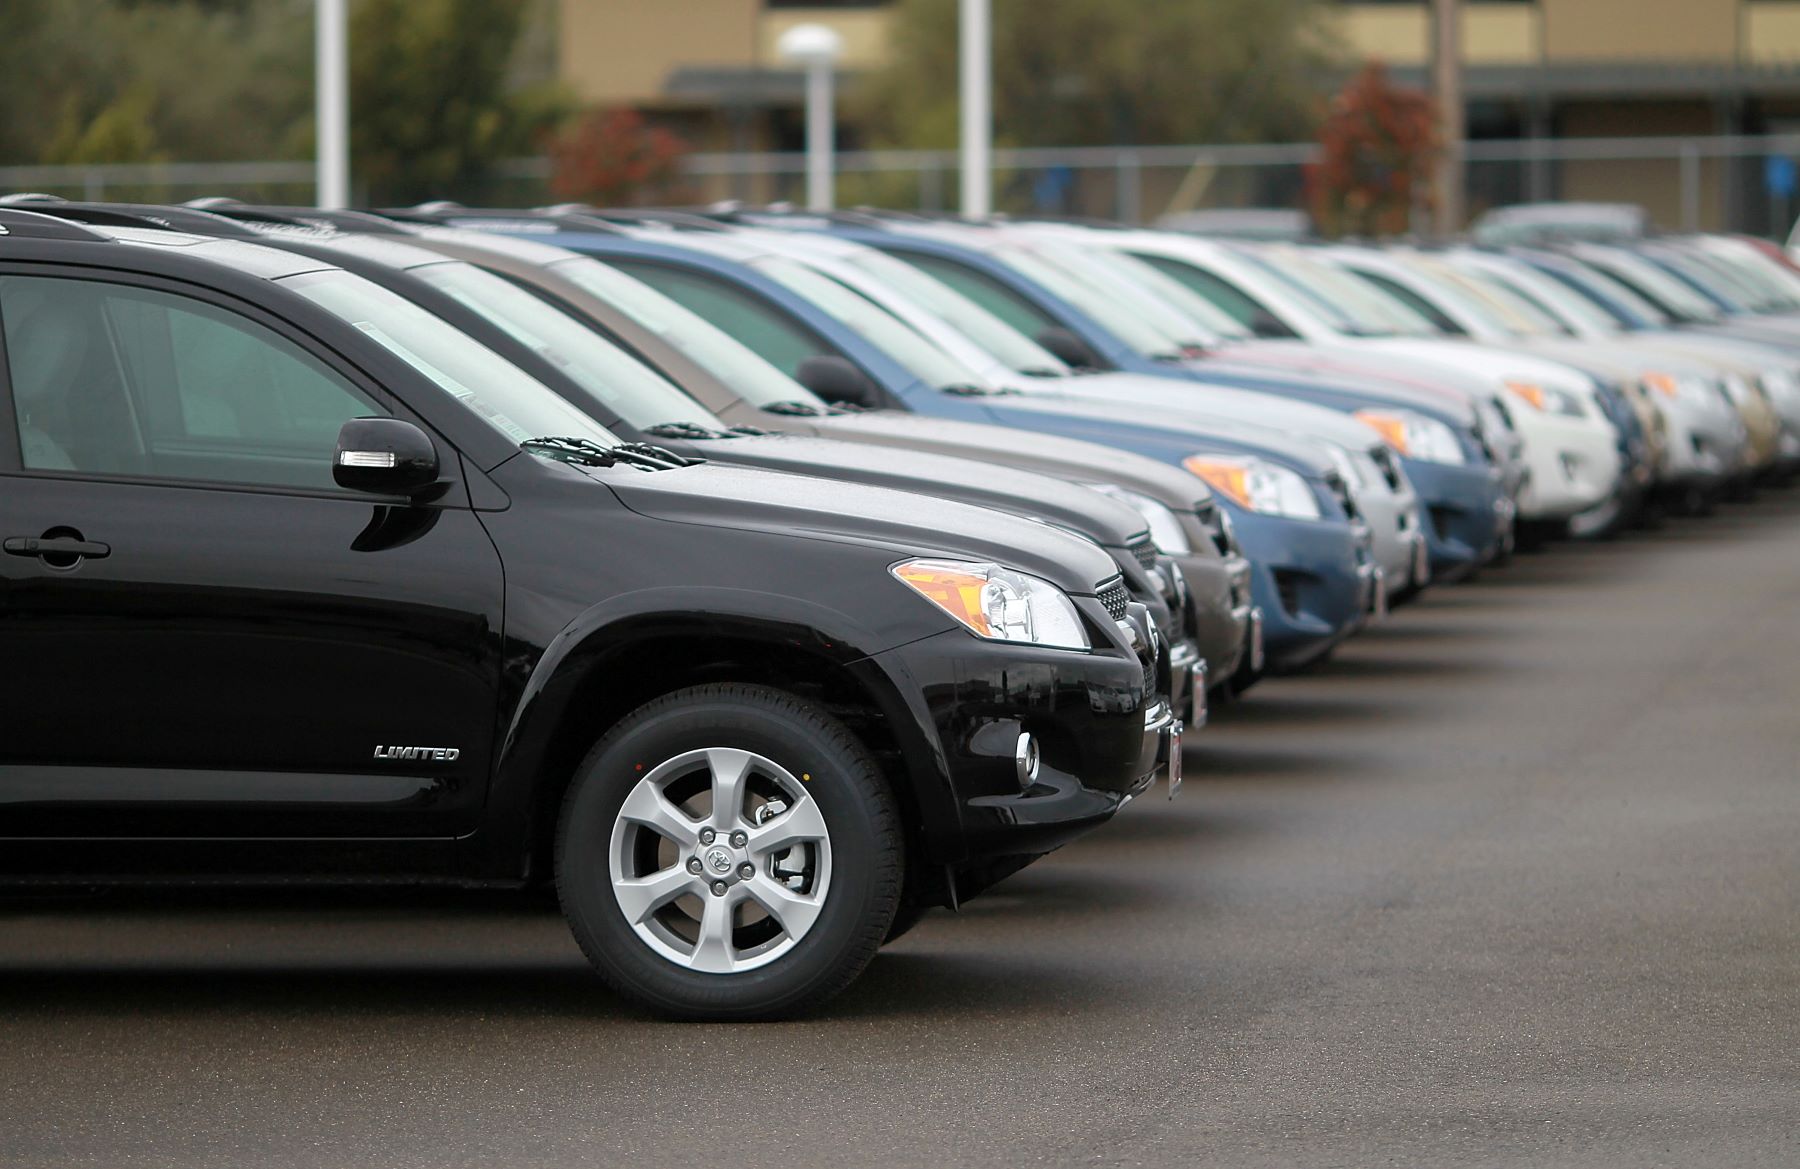 A lineup of Toyota RAV4 SUV models at a Toyota dealership in Oakland, California